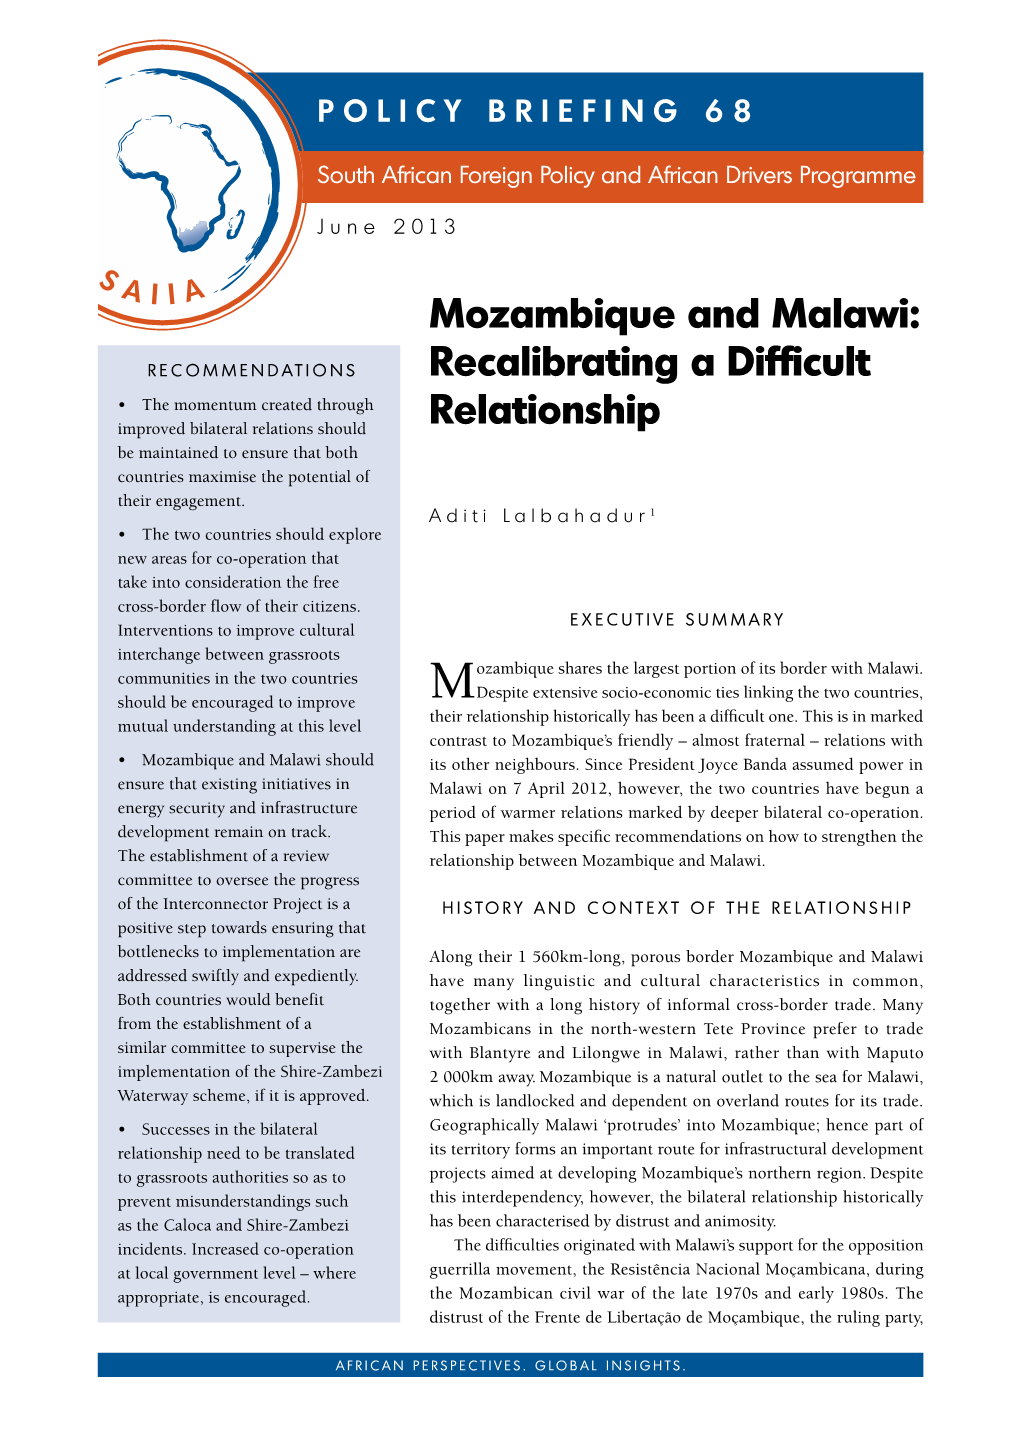 Mozambique and Malawi: Recalibrating a Difficult Relationship